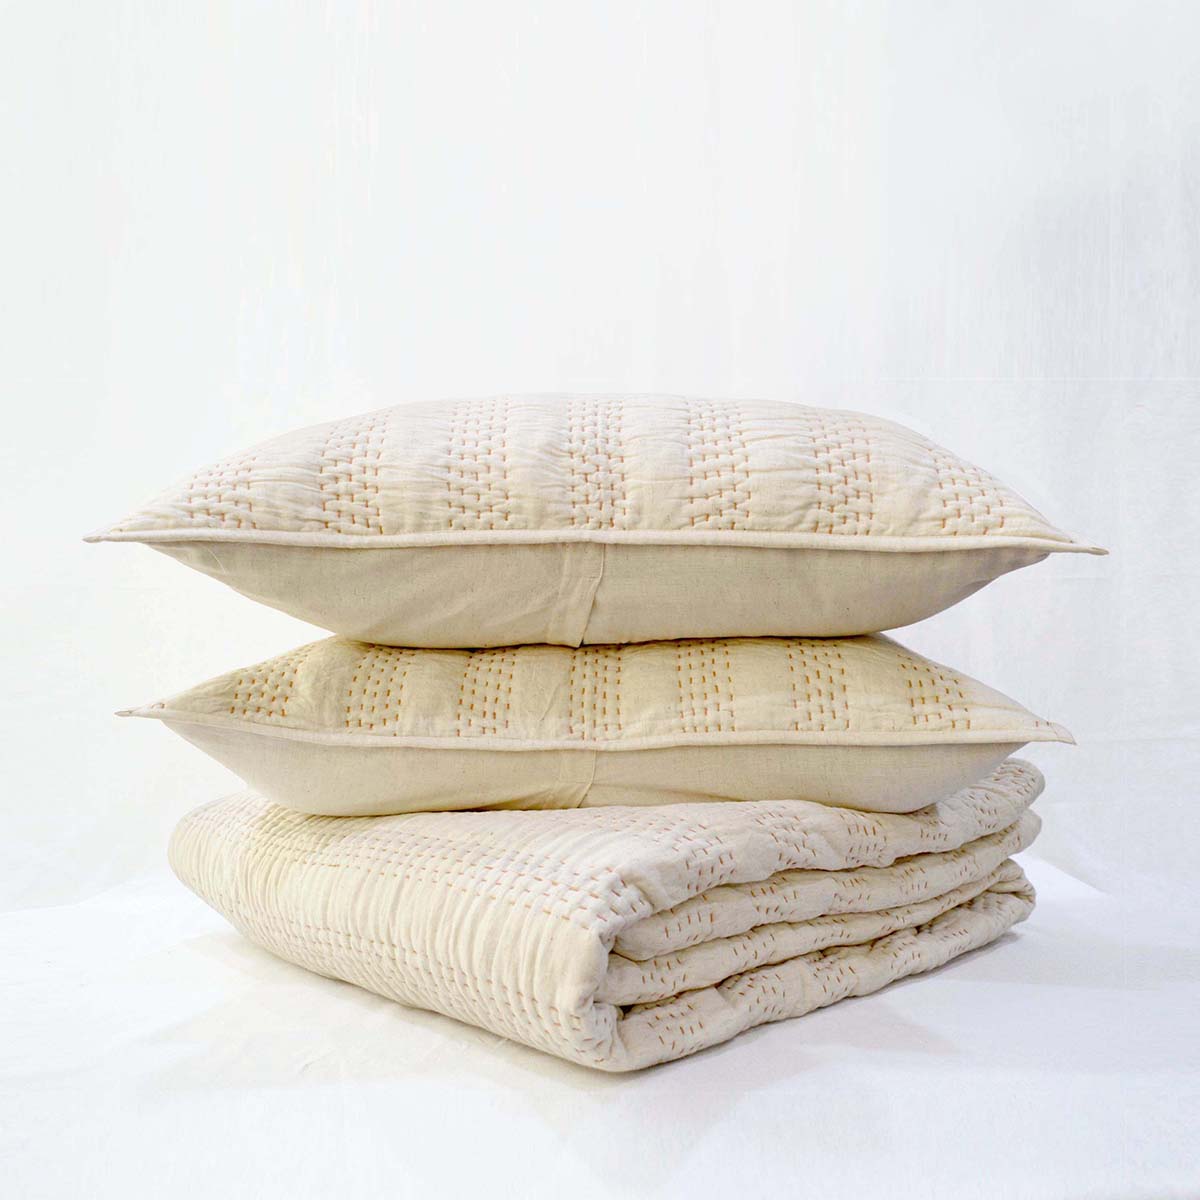 BEIGE cotton linen Quilt sets with stripe pattern quilting, Sizes available